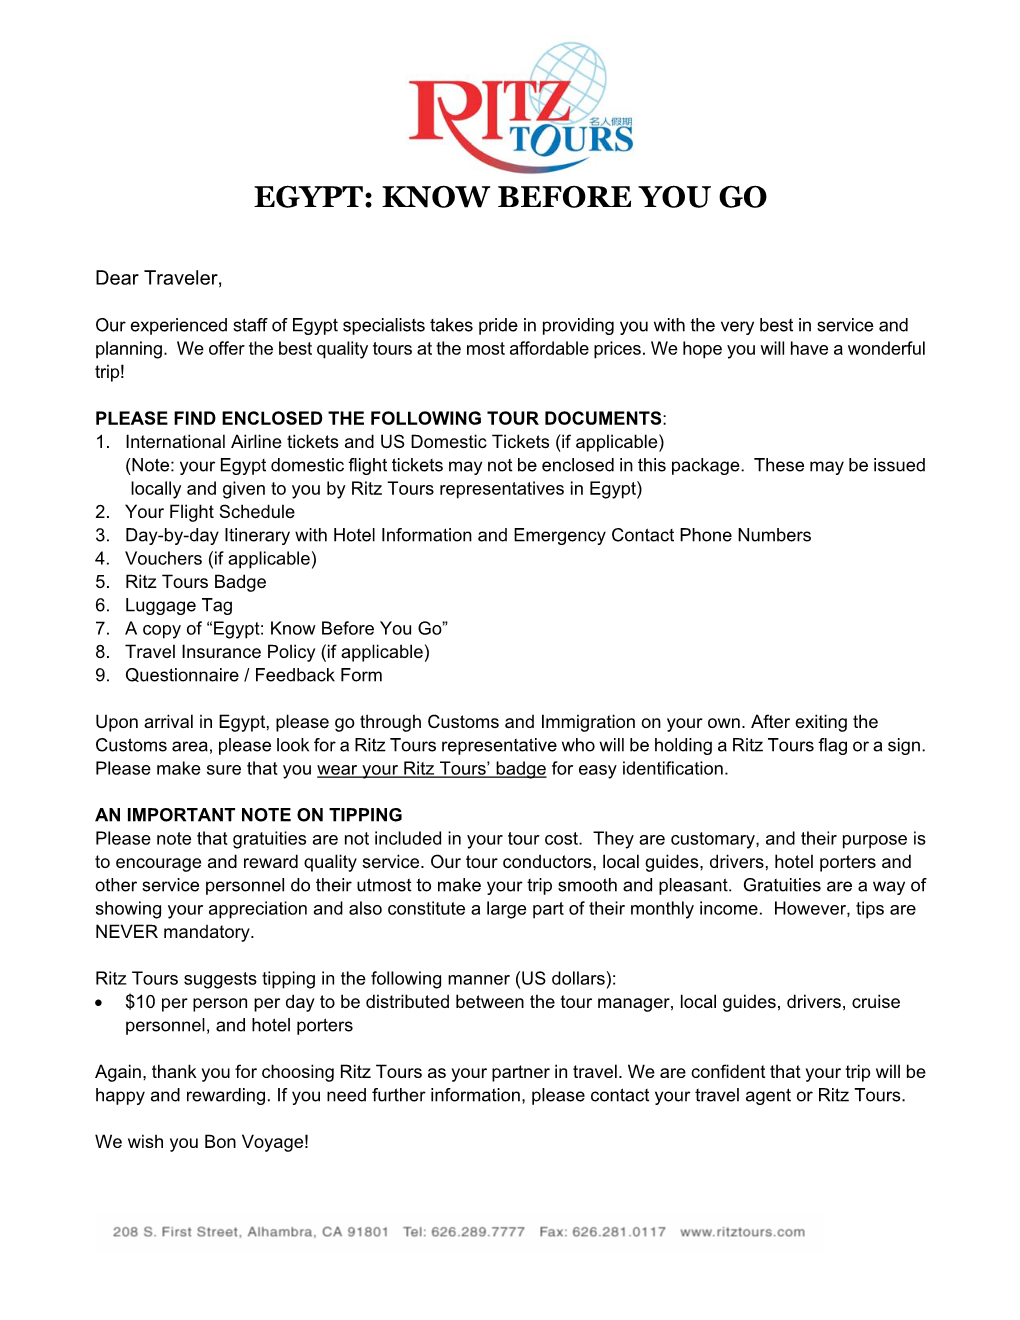 Egypt: Know Before You Go